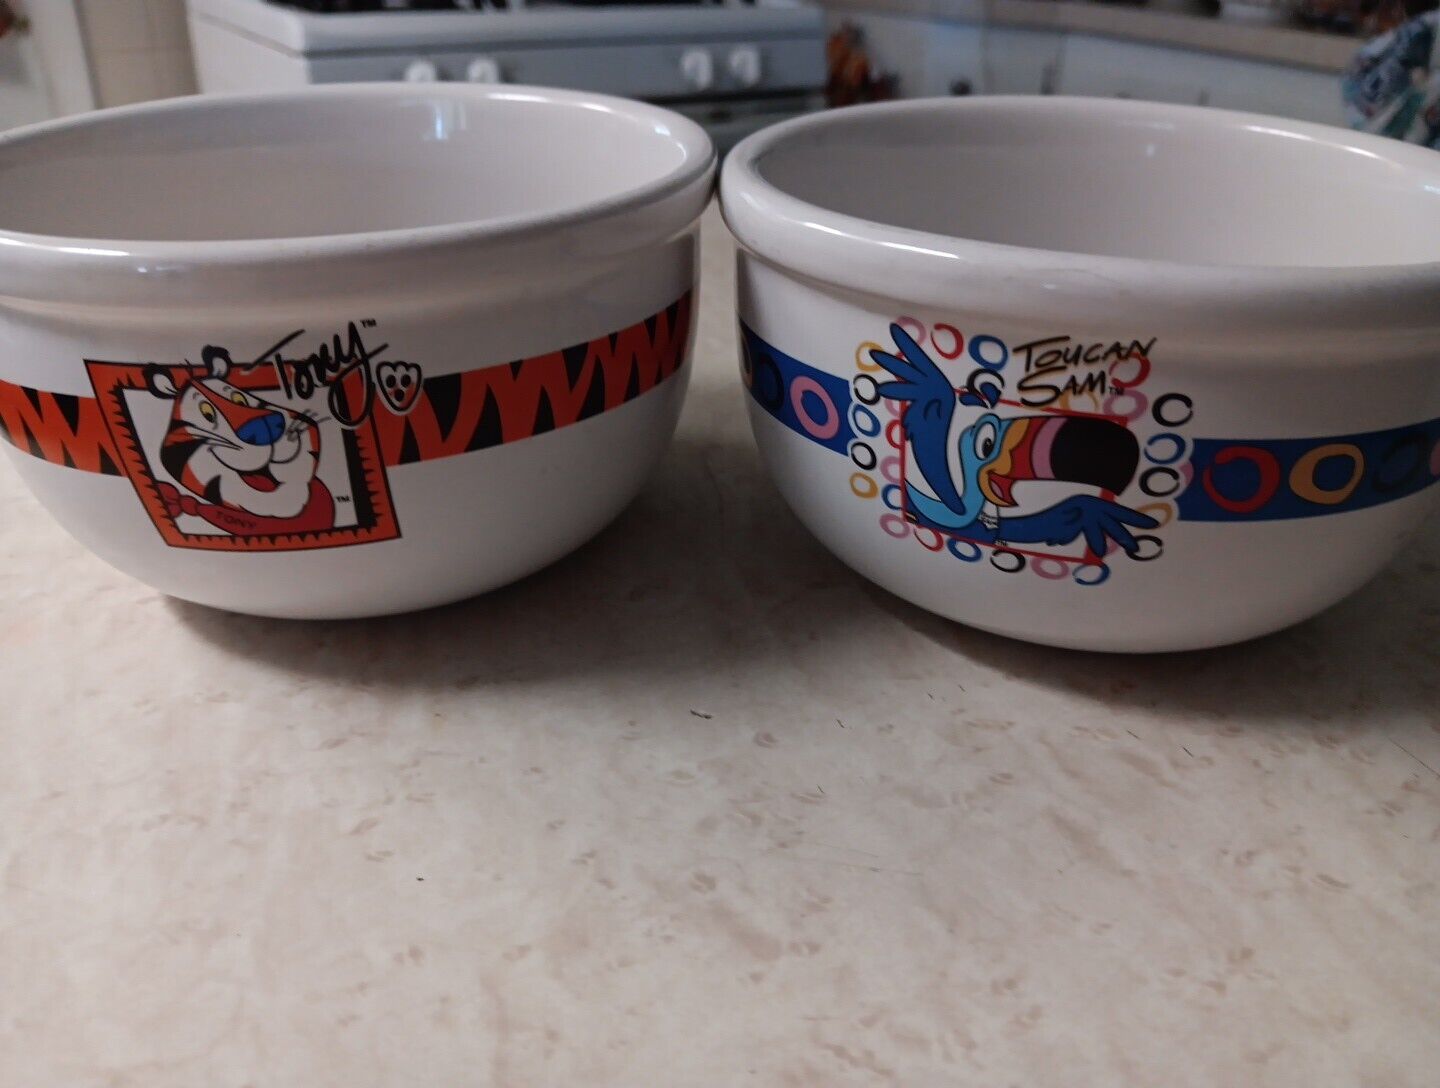 Tony Tiger And Toucan Sam Cereal Bowls